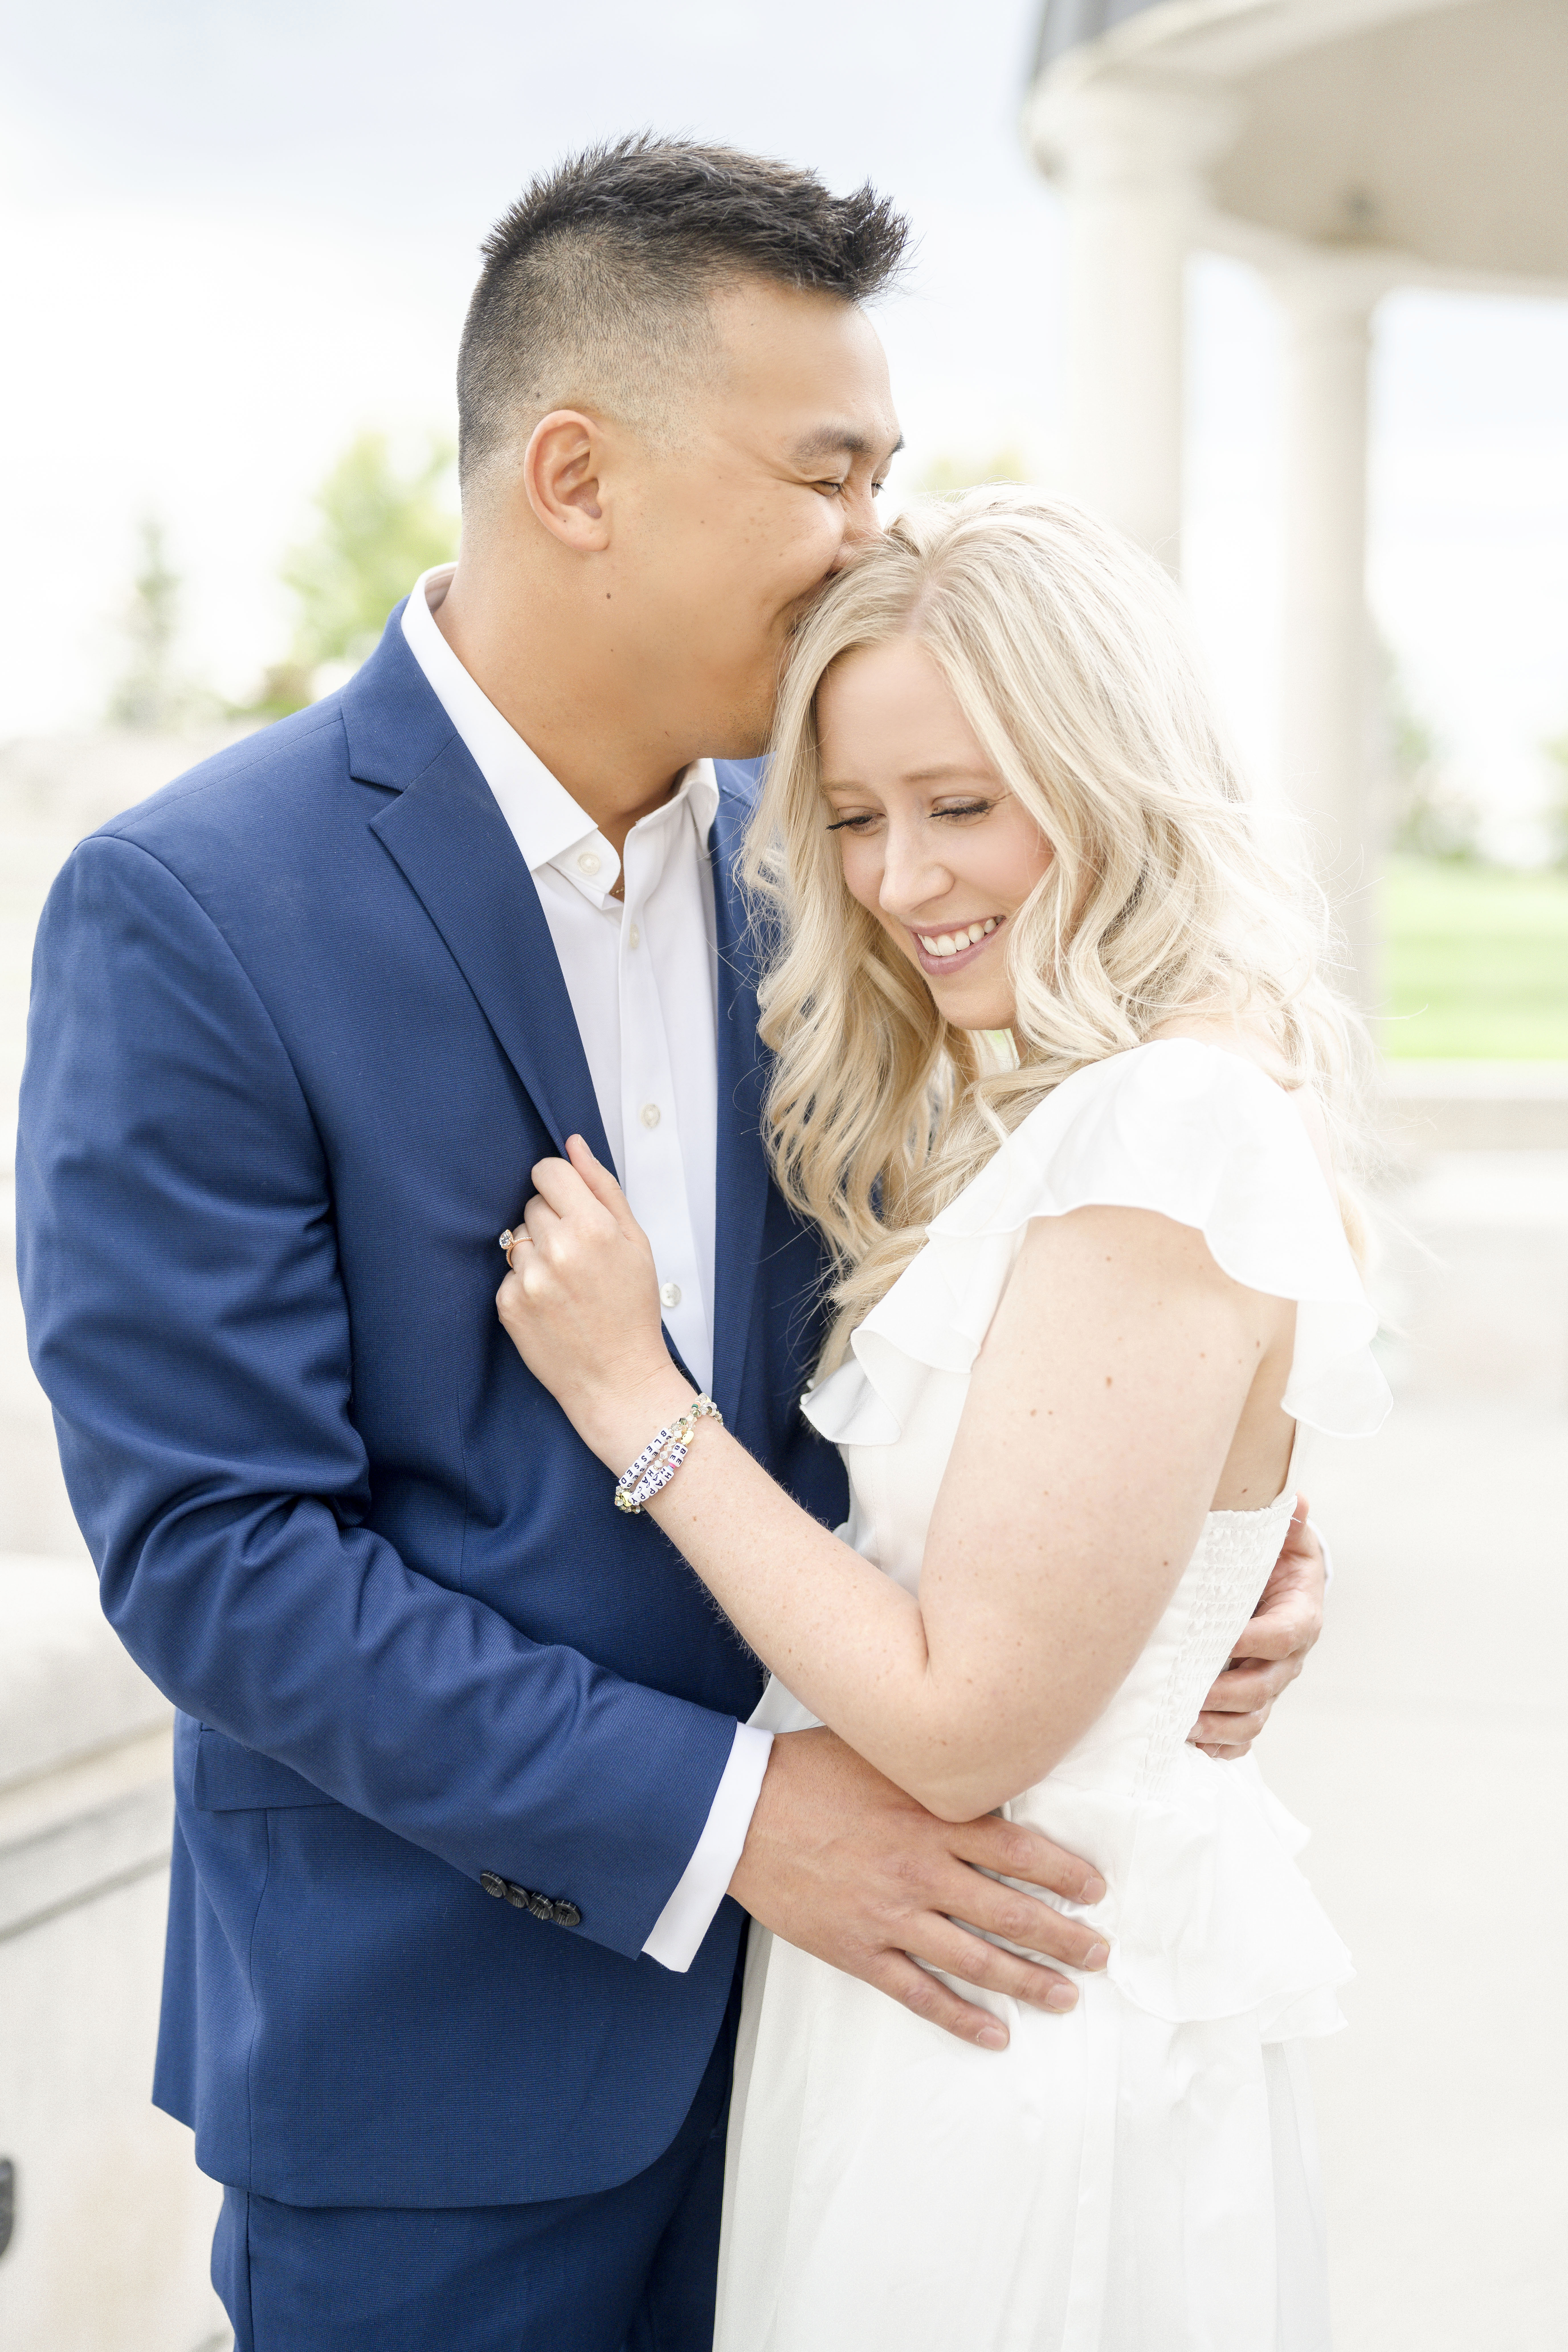 Fall engagement session at Coxhall Gardens